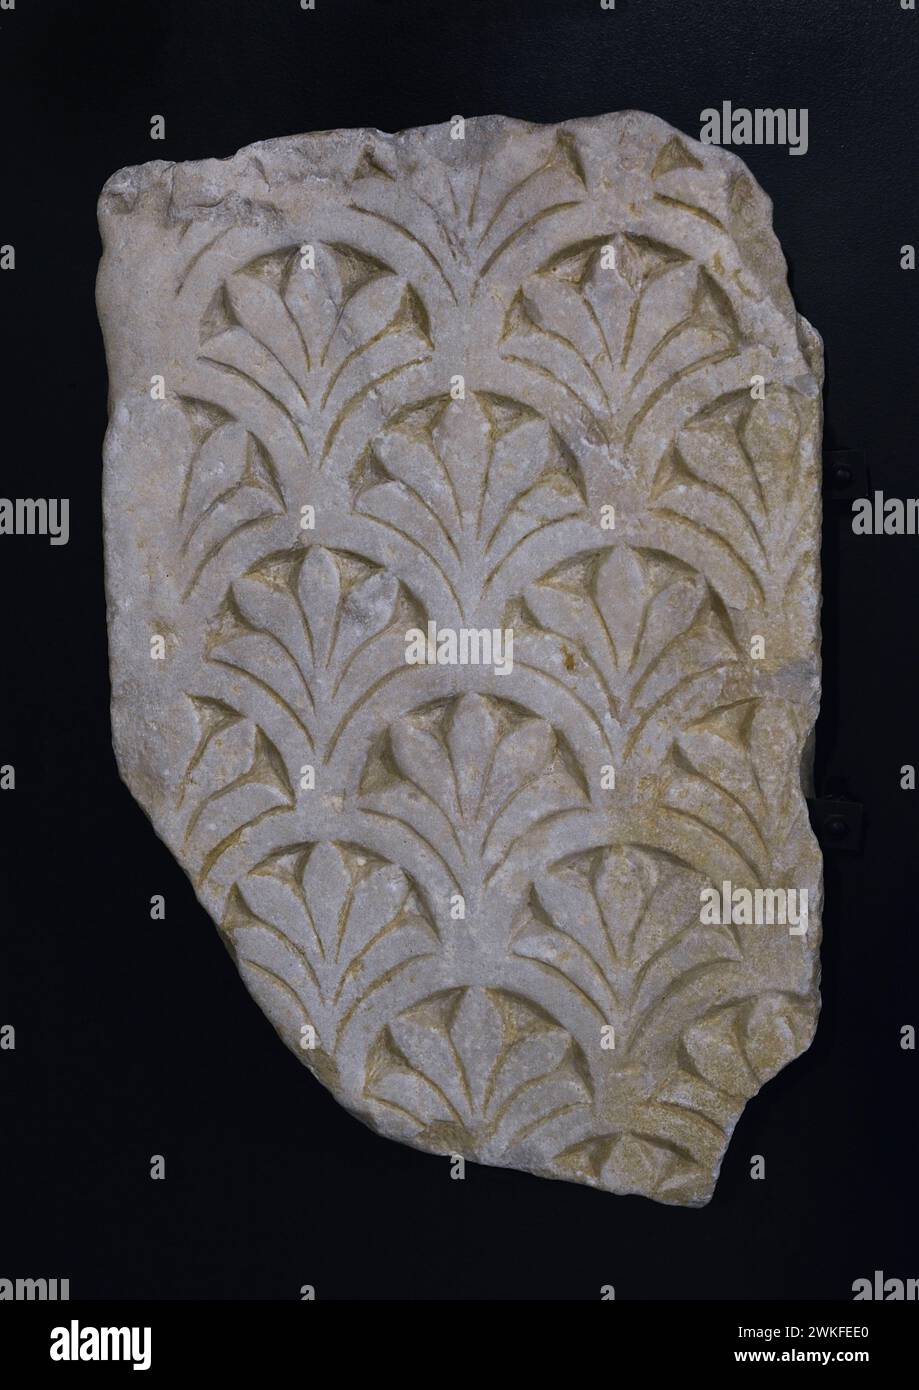 Plaque of chancel decorated with imbricated semicircles showing fleur-de-lis and palmettes. Marble. 7th century. Unknown provenance. Museum of Visigoth Councils and Culture. Toledo, Castile-La Mancha, Spain. Stock Photo